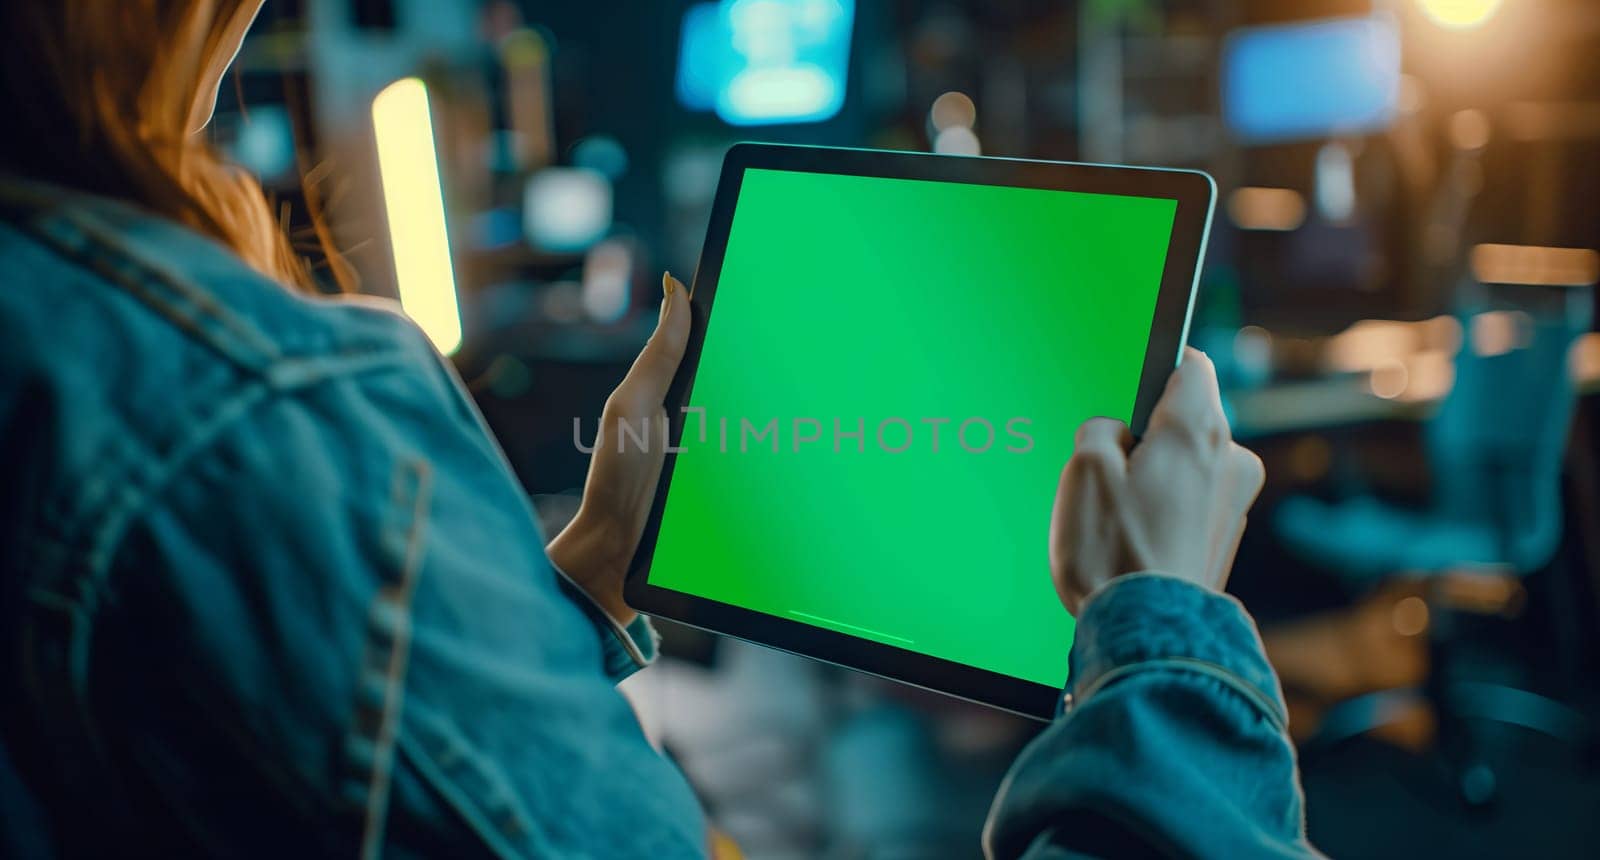 A woman is enjoying fun leisure time at an event, holding a green screen tablet by richwolf